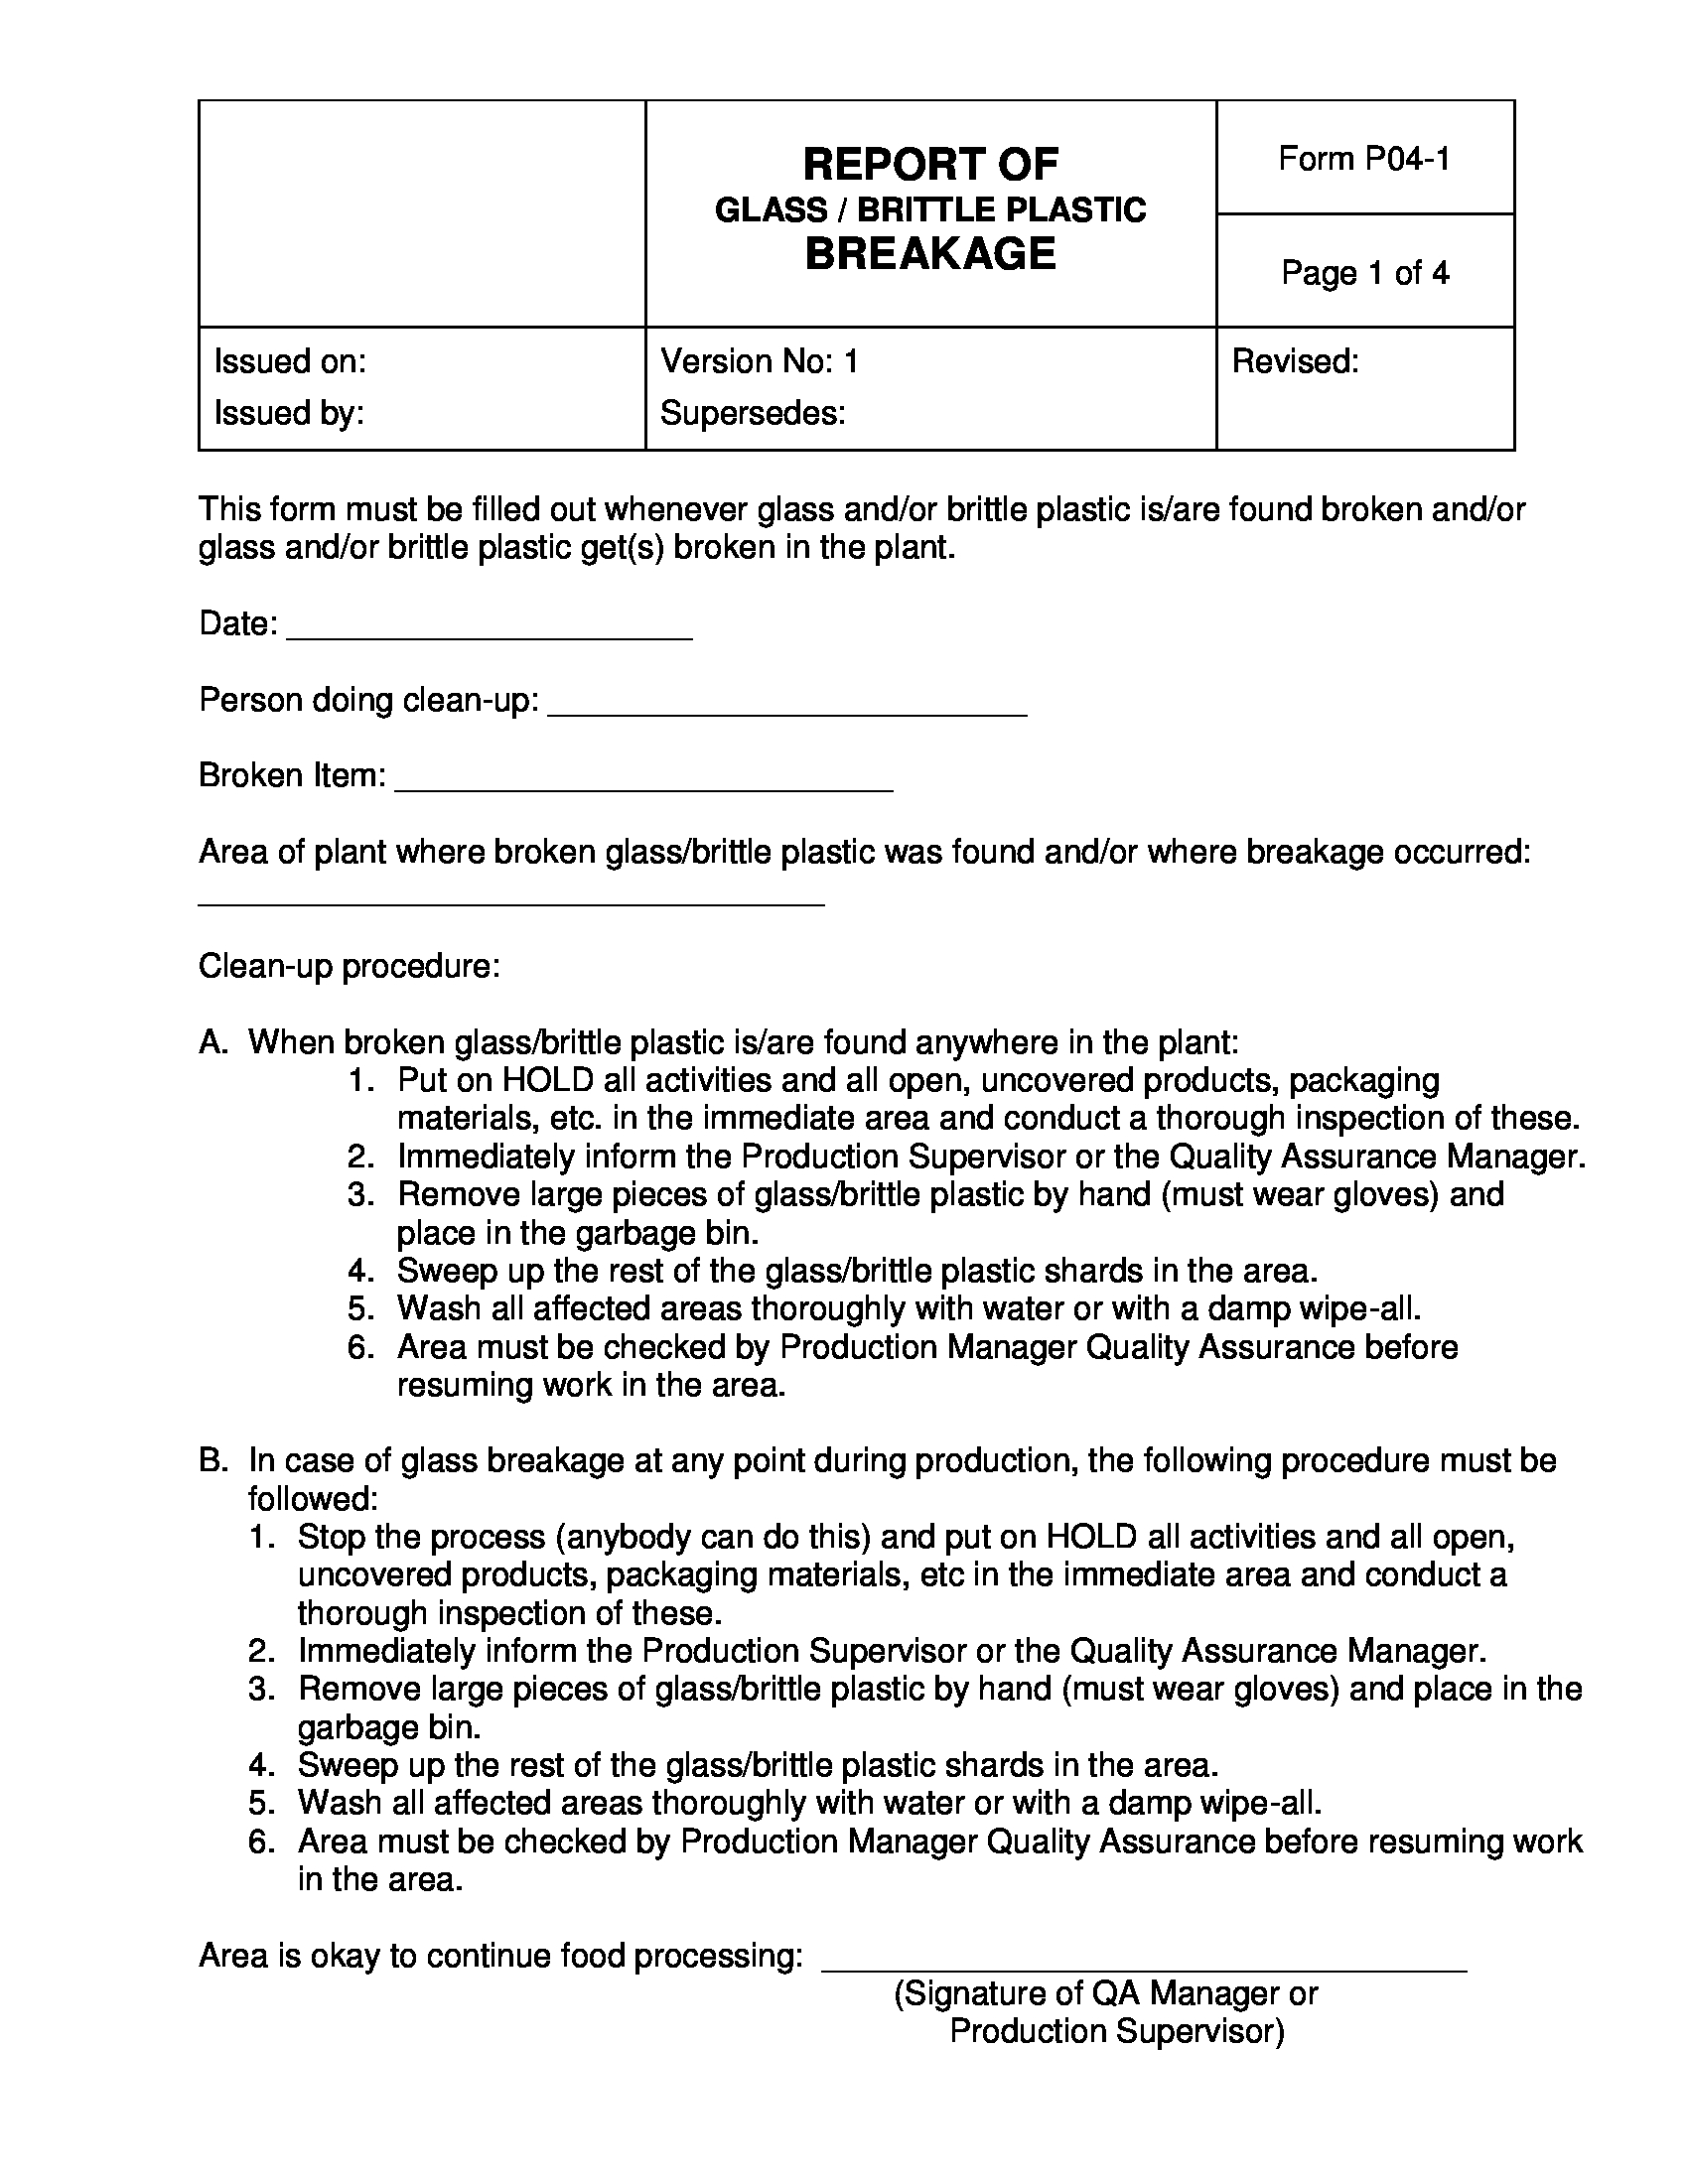 report of glass breakage form 1